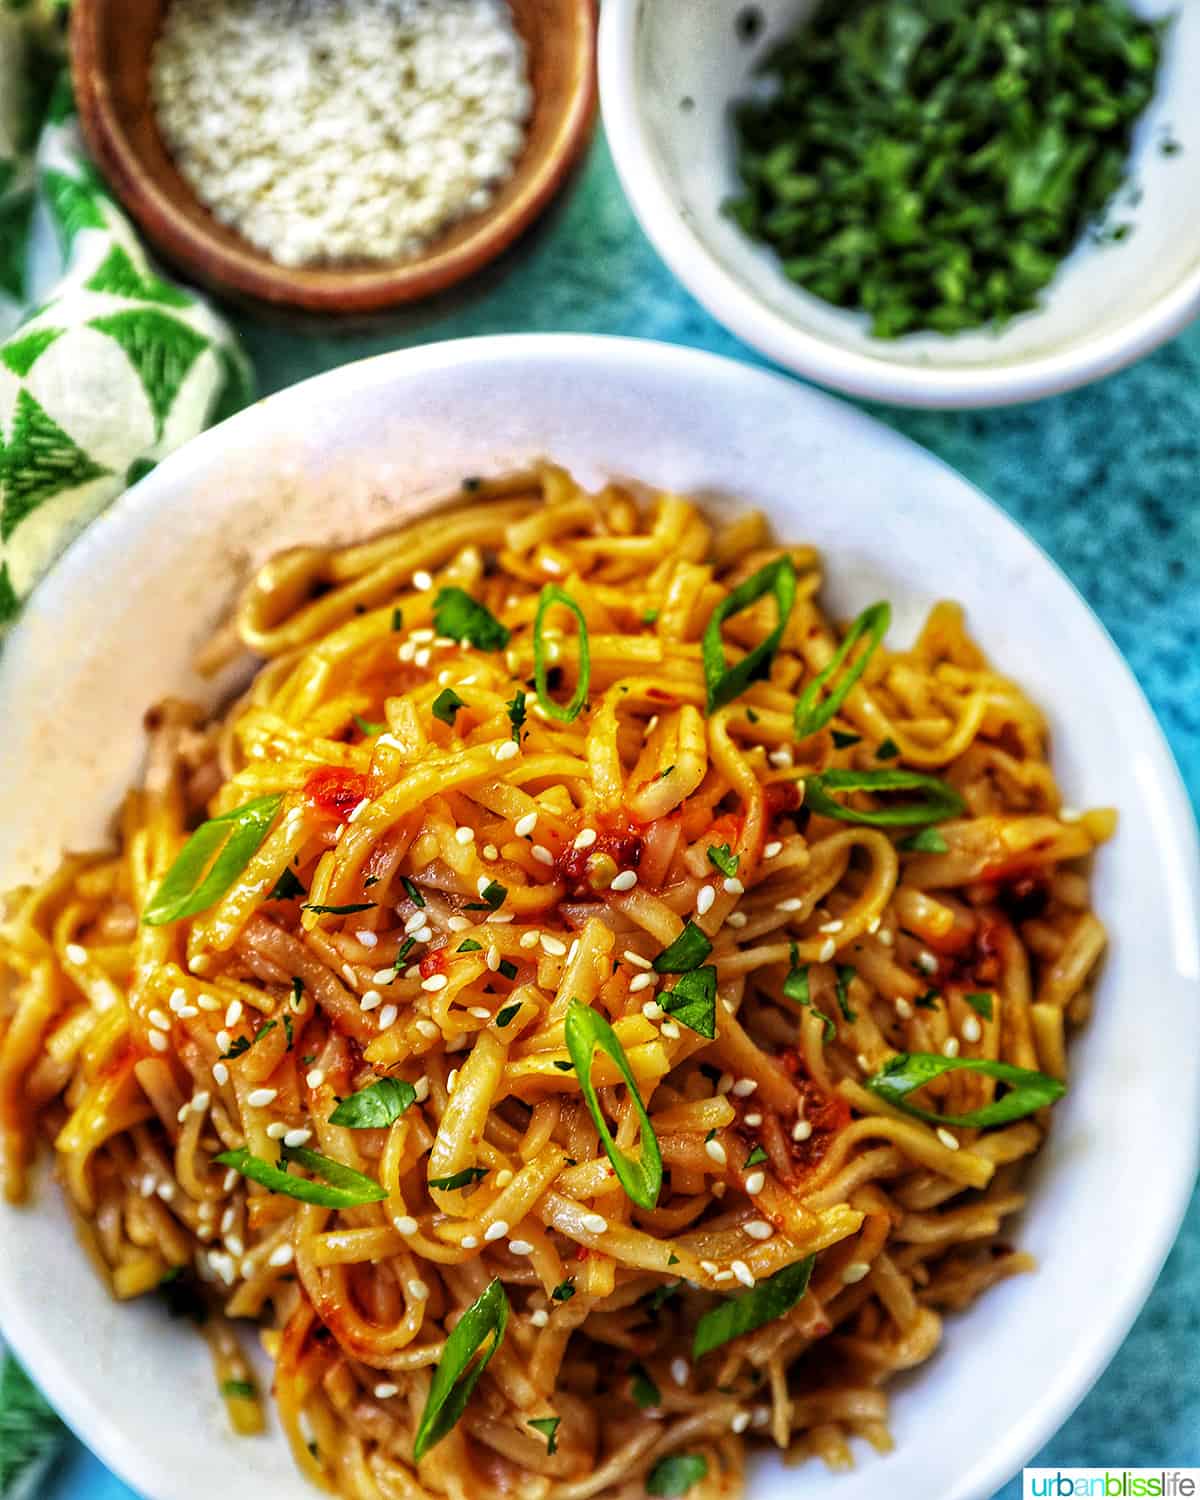 Chili Garlic Noodles with green onions and sesame seeds in a white bowl.